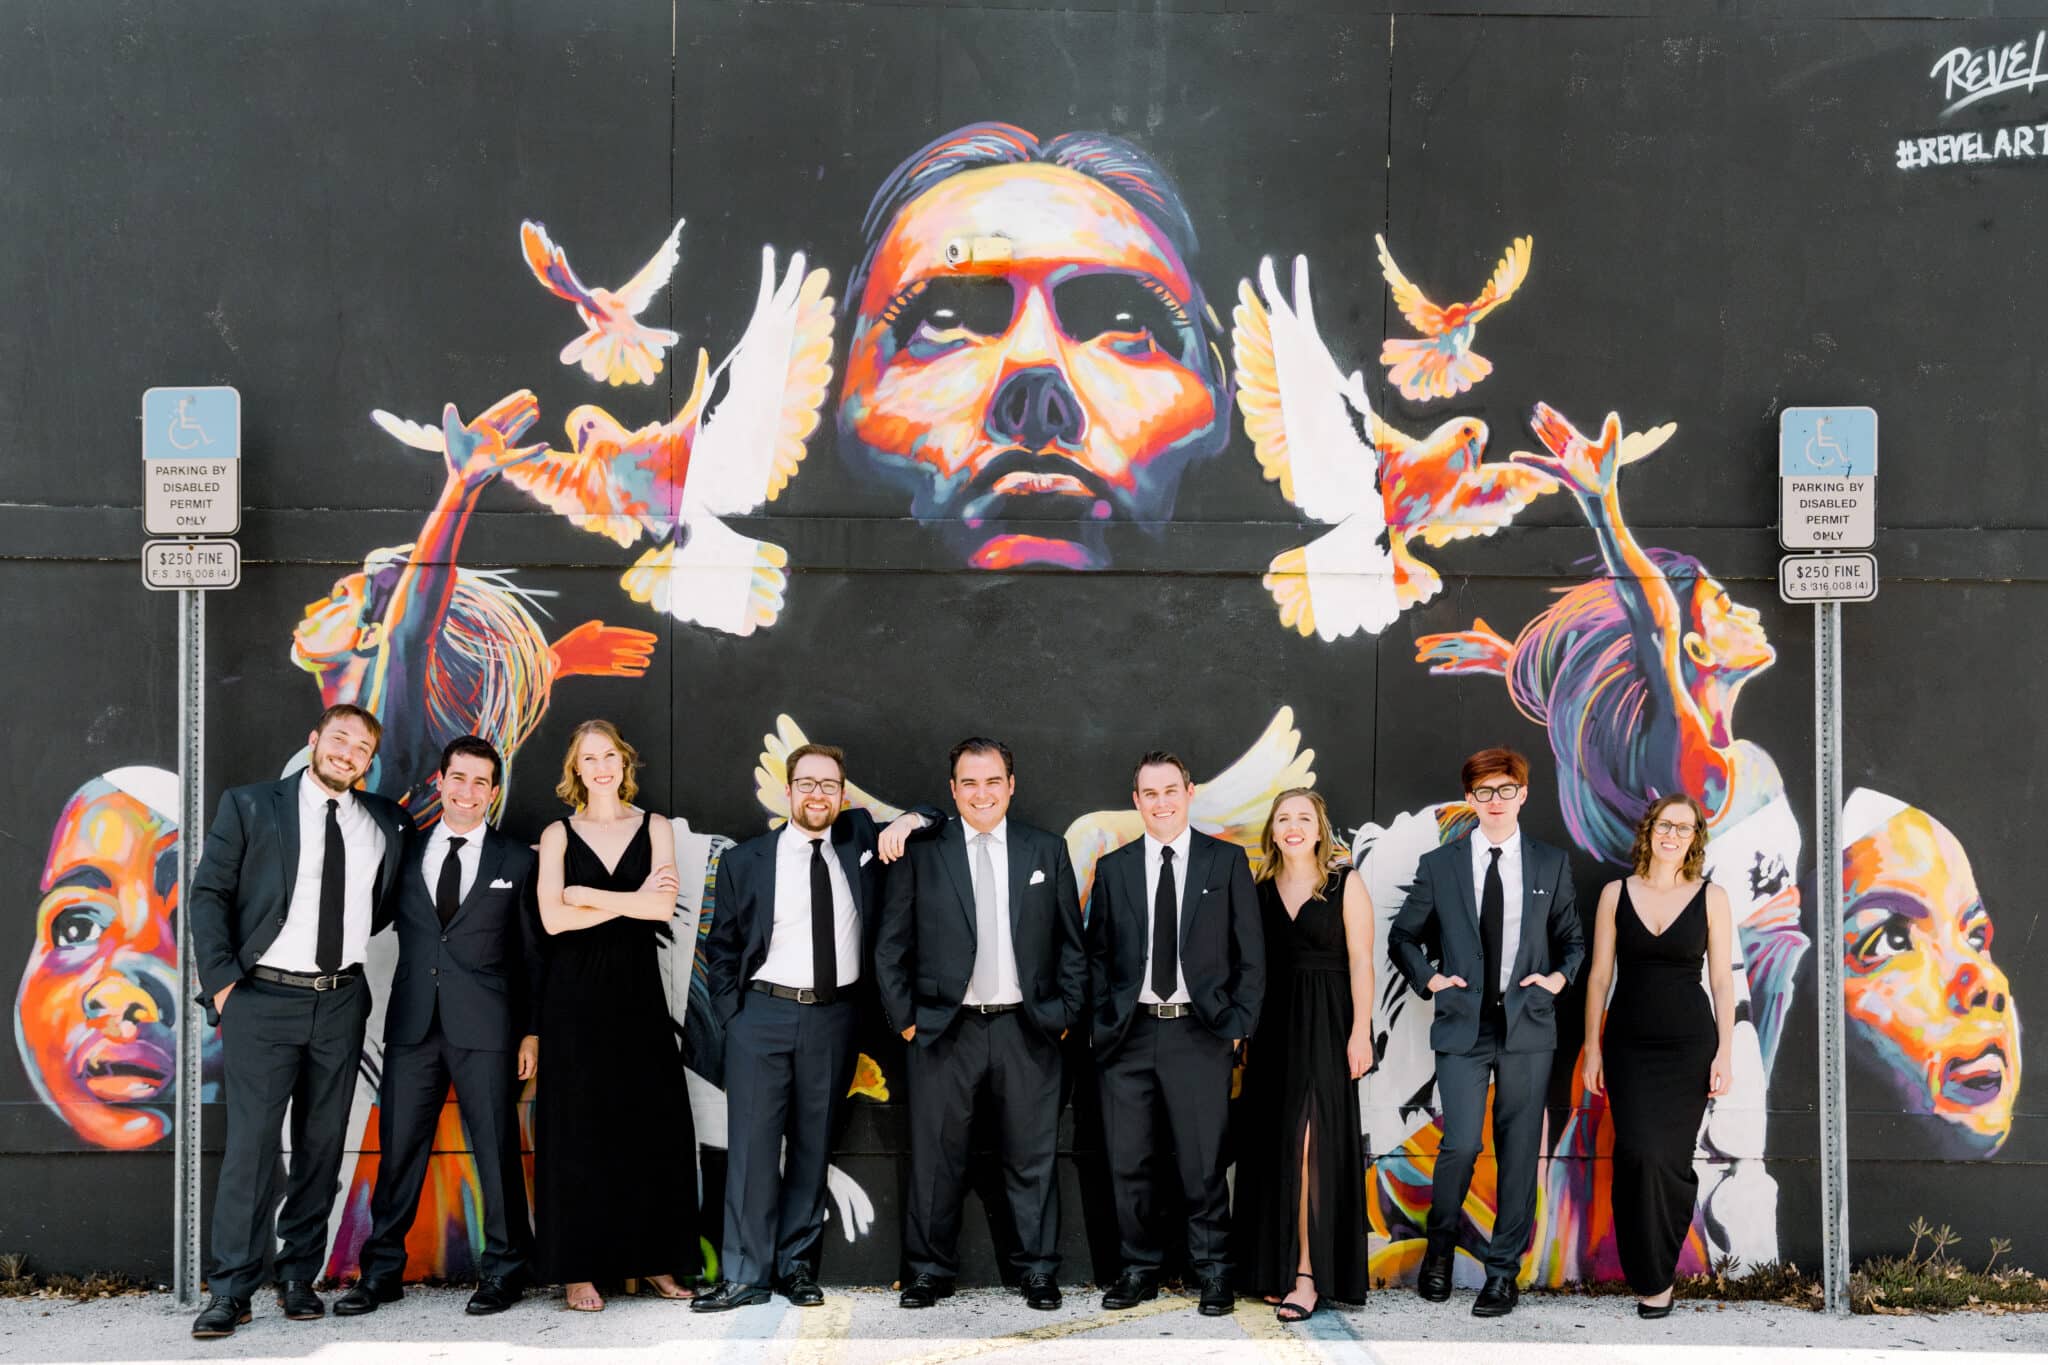 Florida groom stands with his mixed gender wedding party against wall art mural